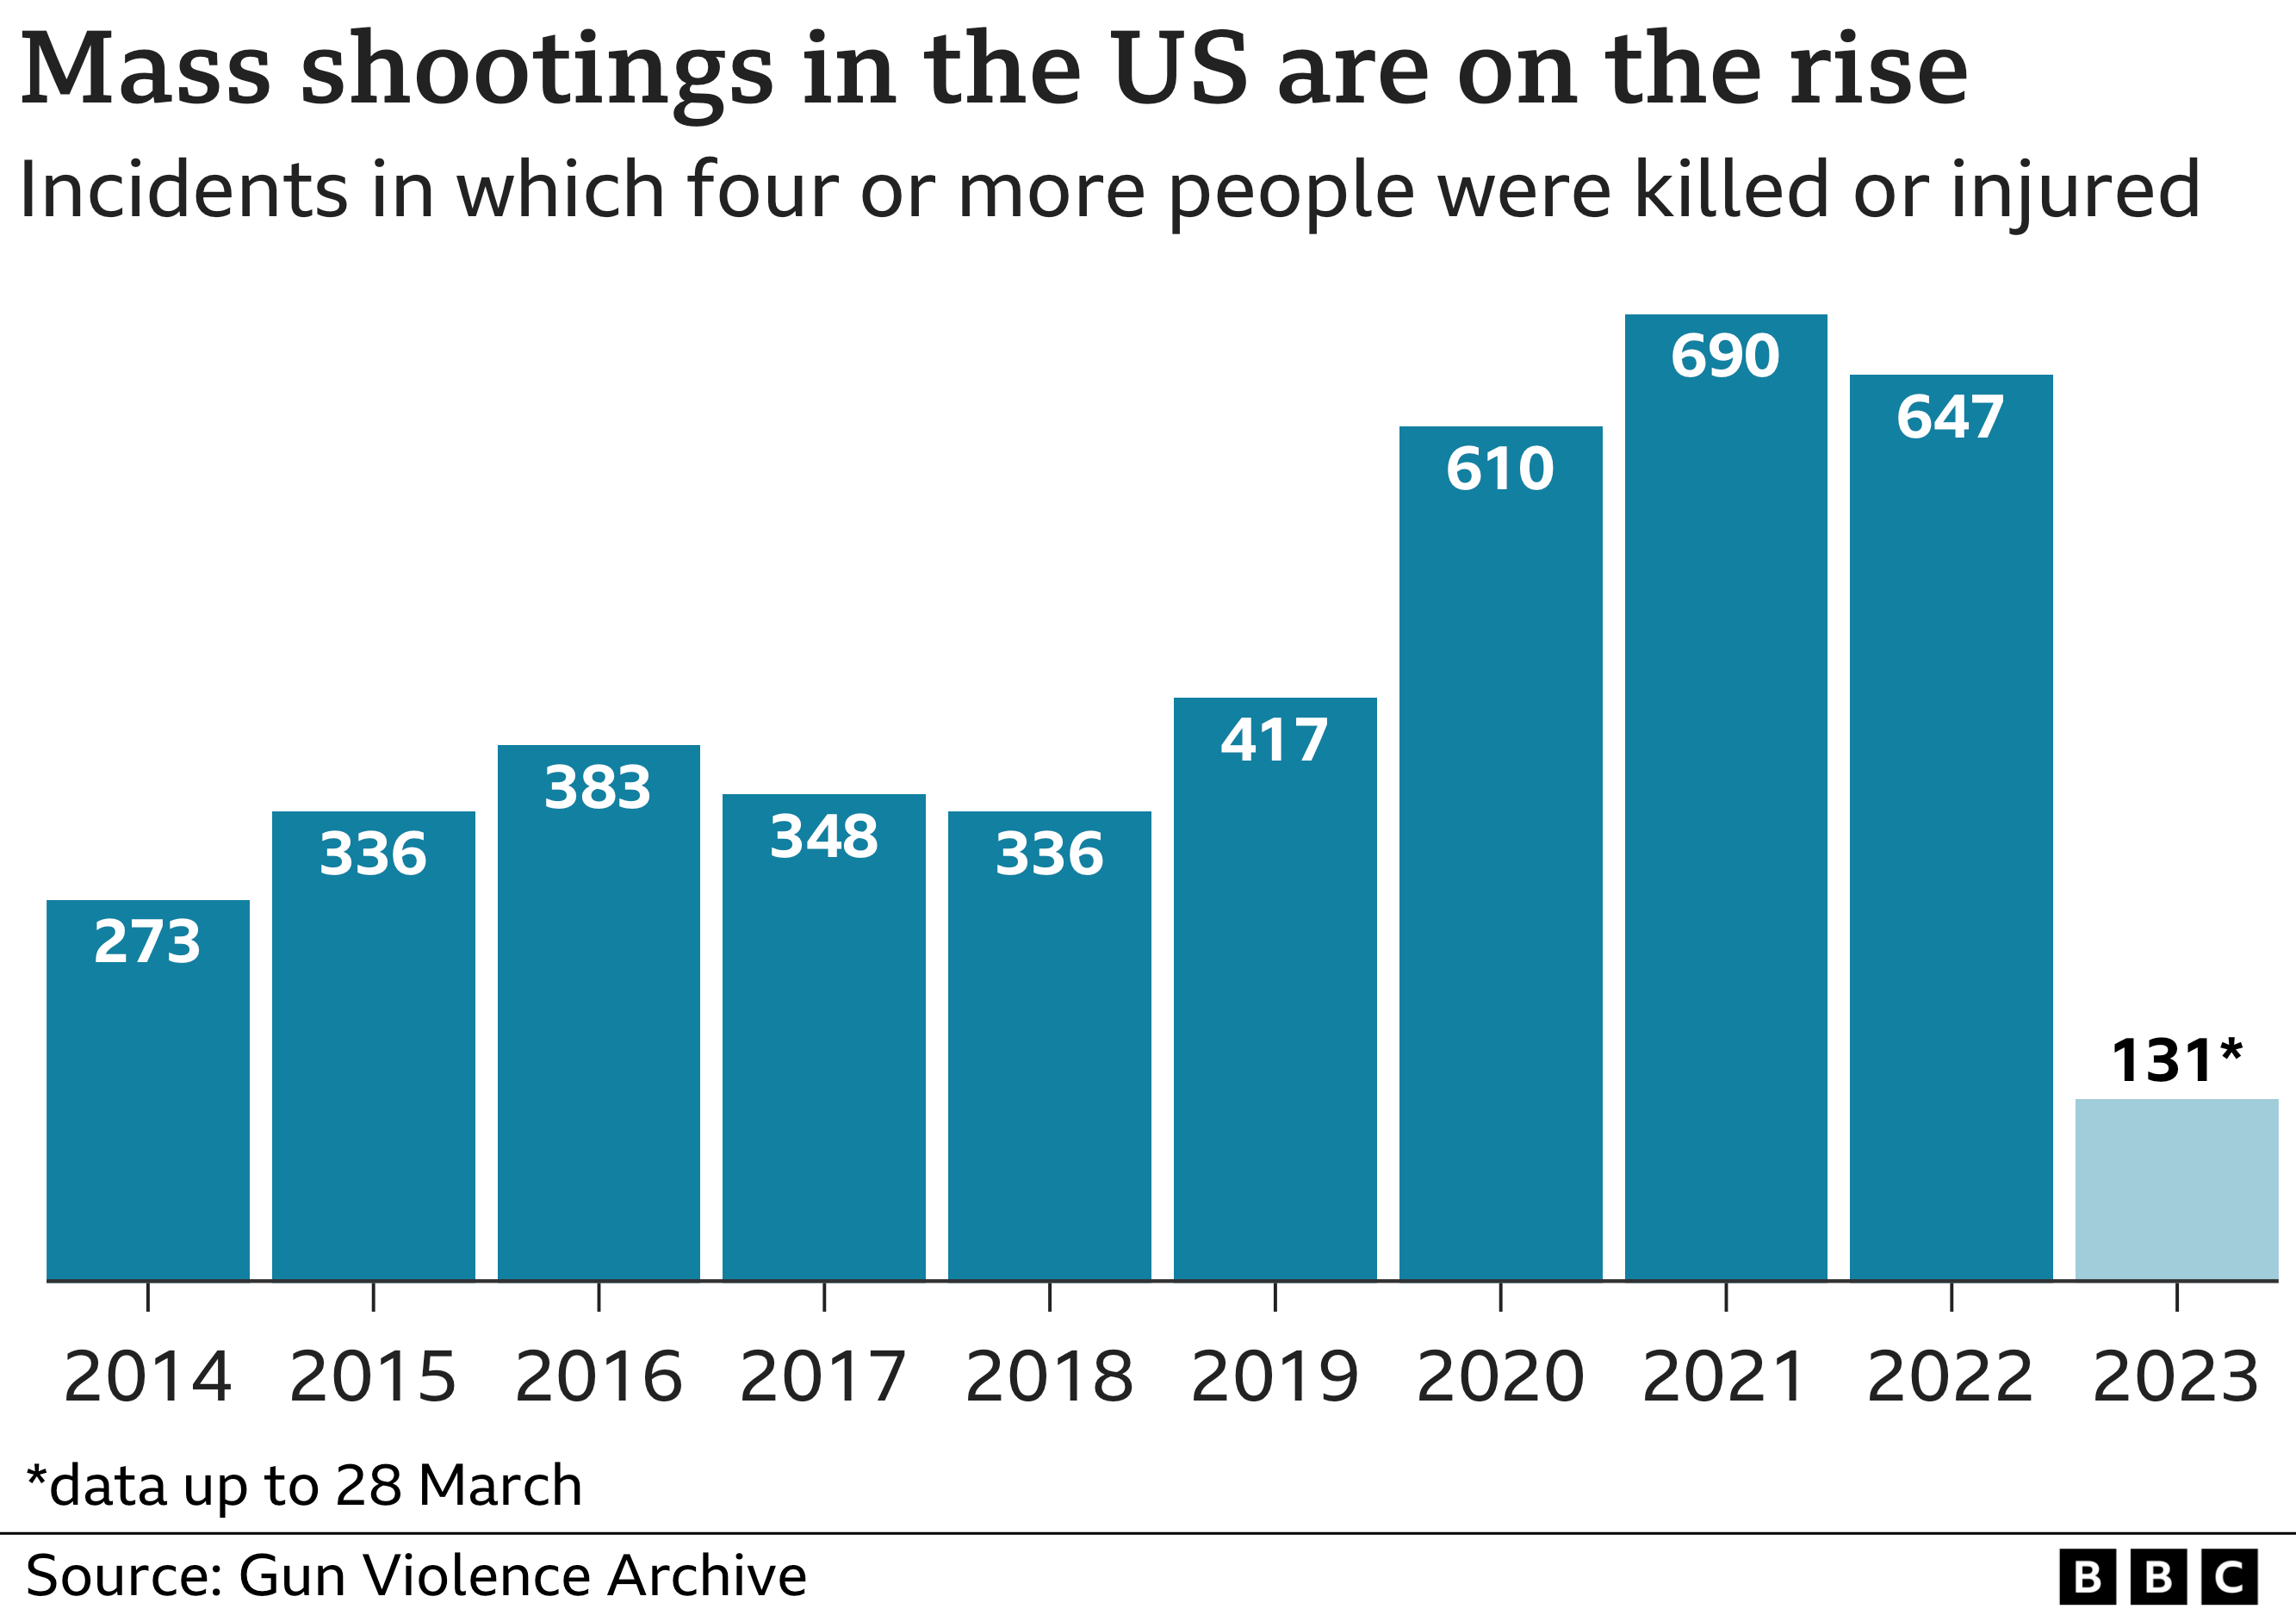 Mass shootings chart showing the number of mass shooting events in the US since 2014 when there were 273 to 2023 when there have been 131 so far, according to the Gun Violence Archive. The worst year was 2021 with 690 mass shootings recorded